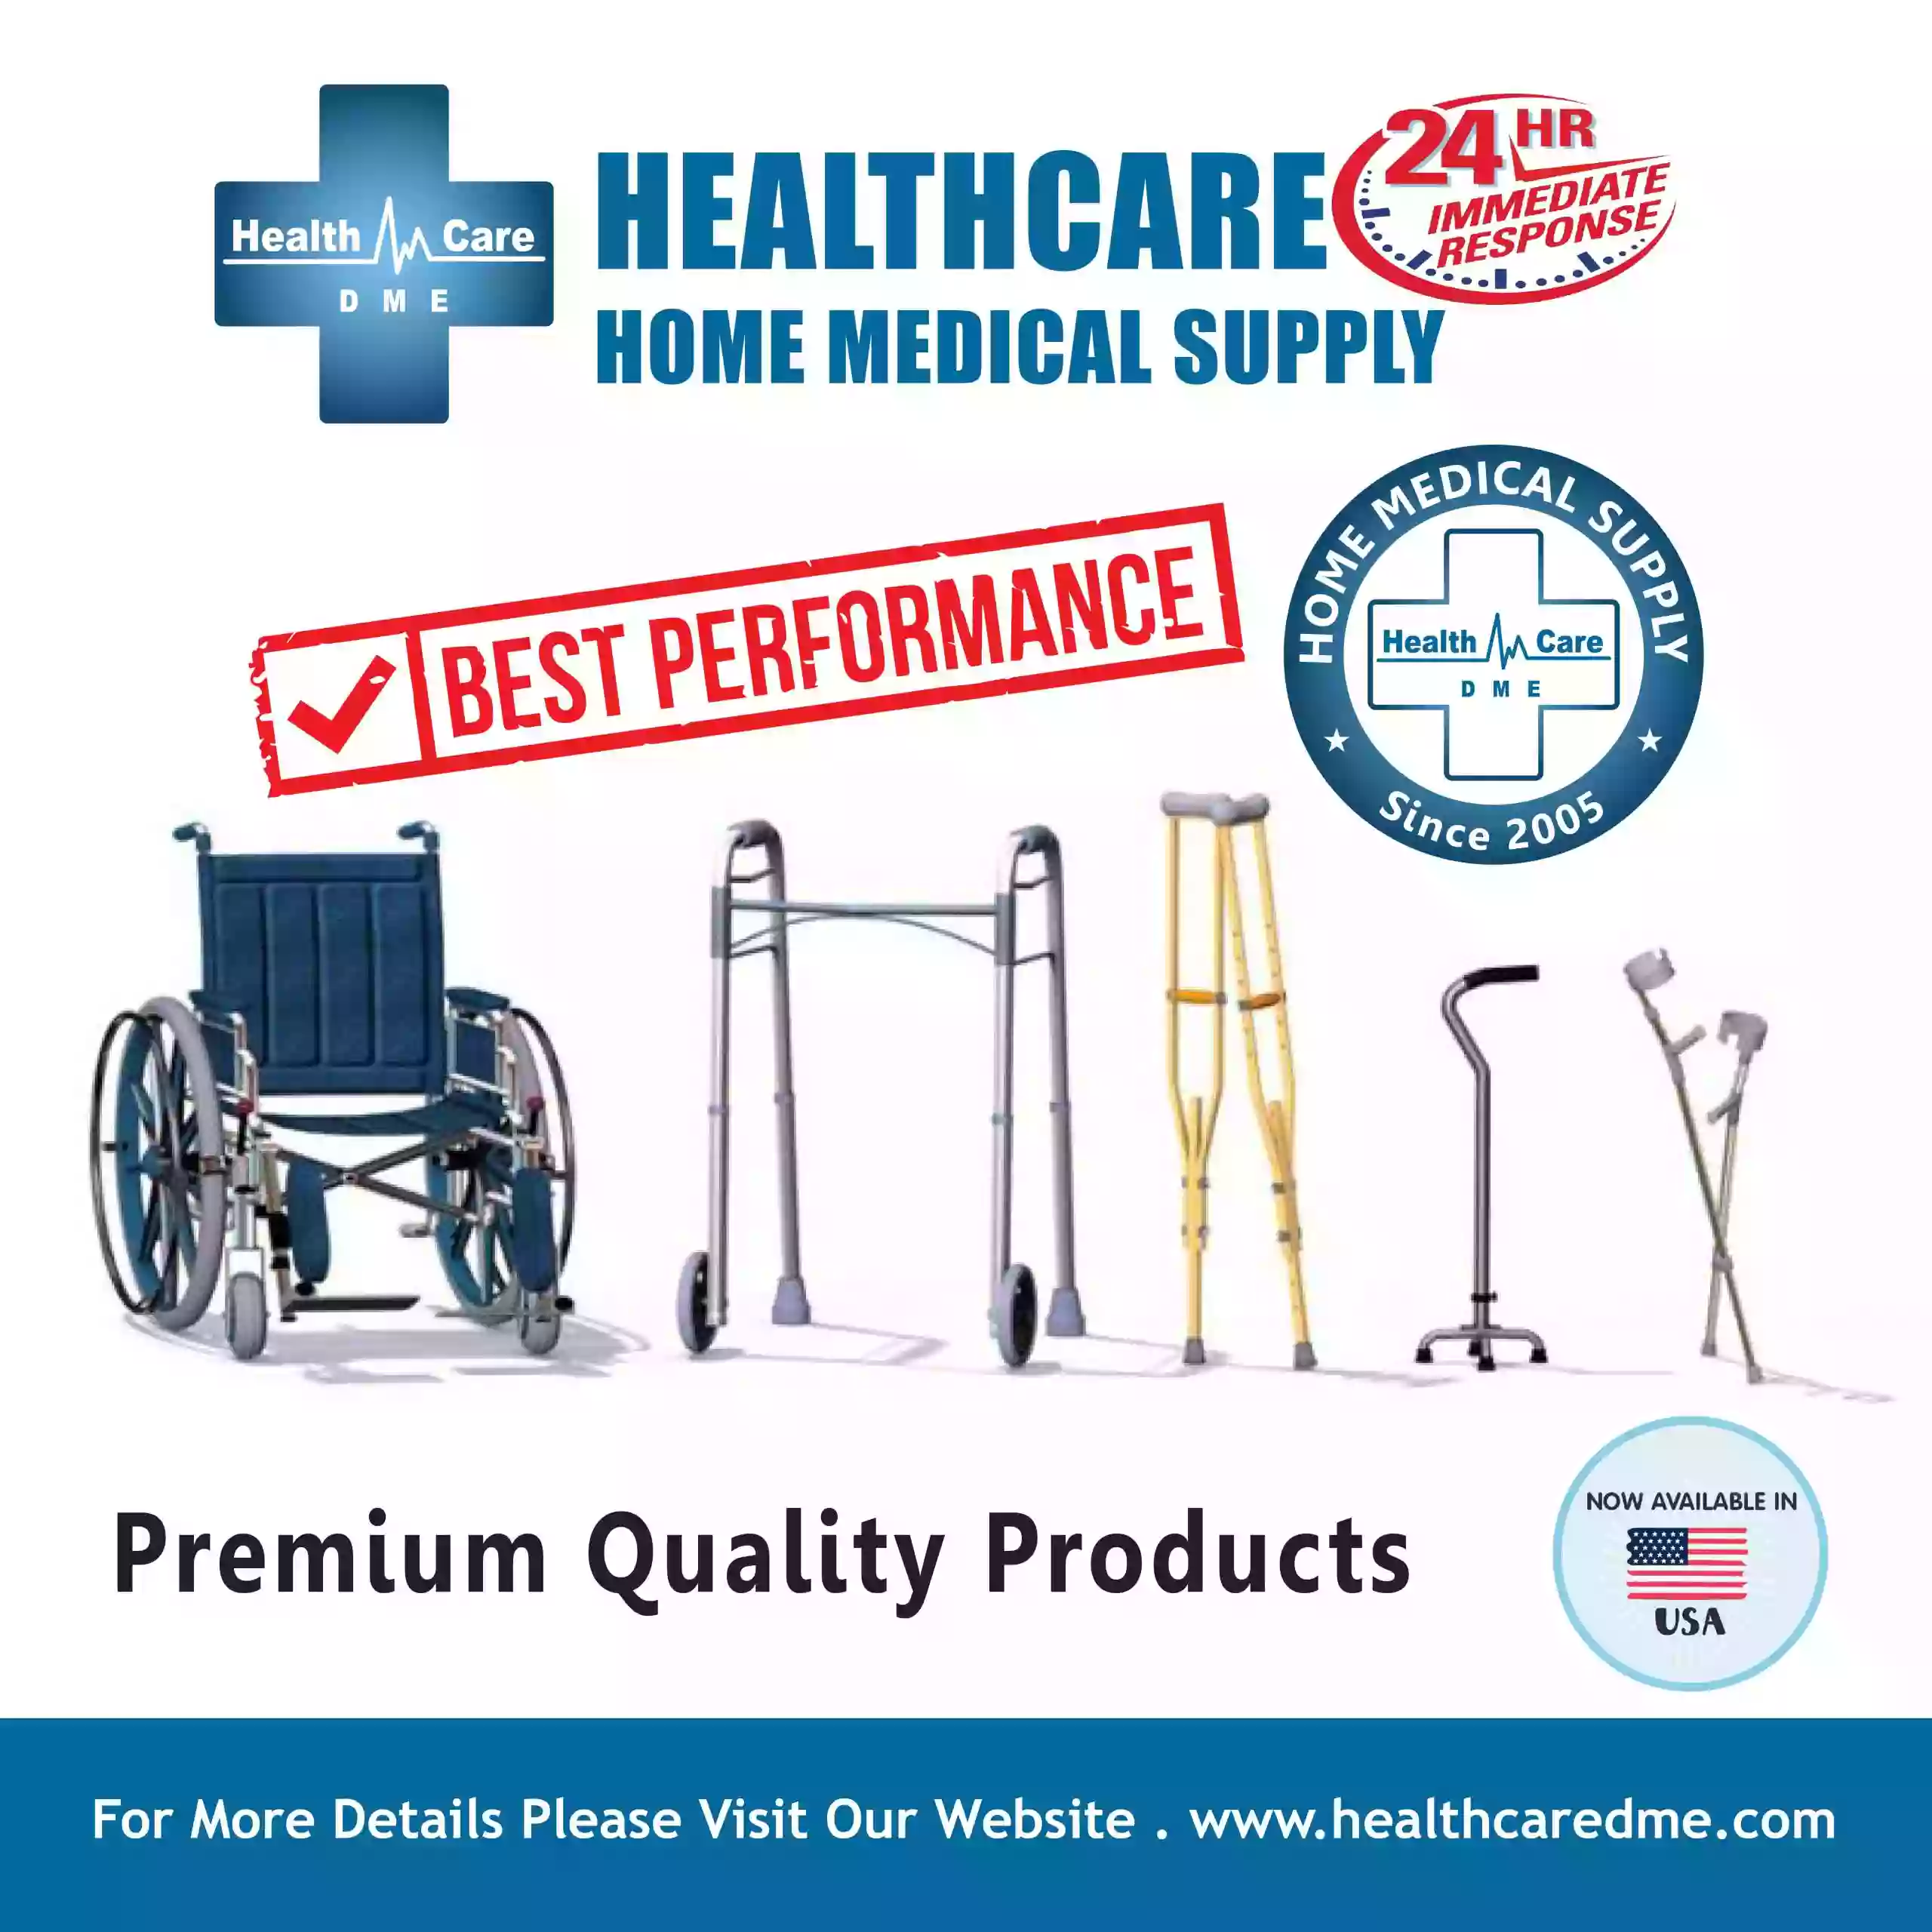 Healthcare DME